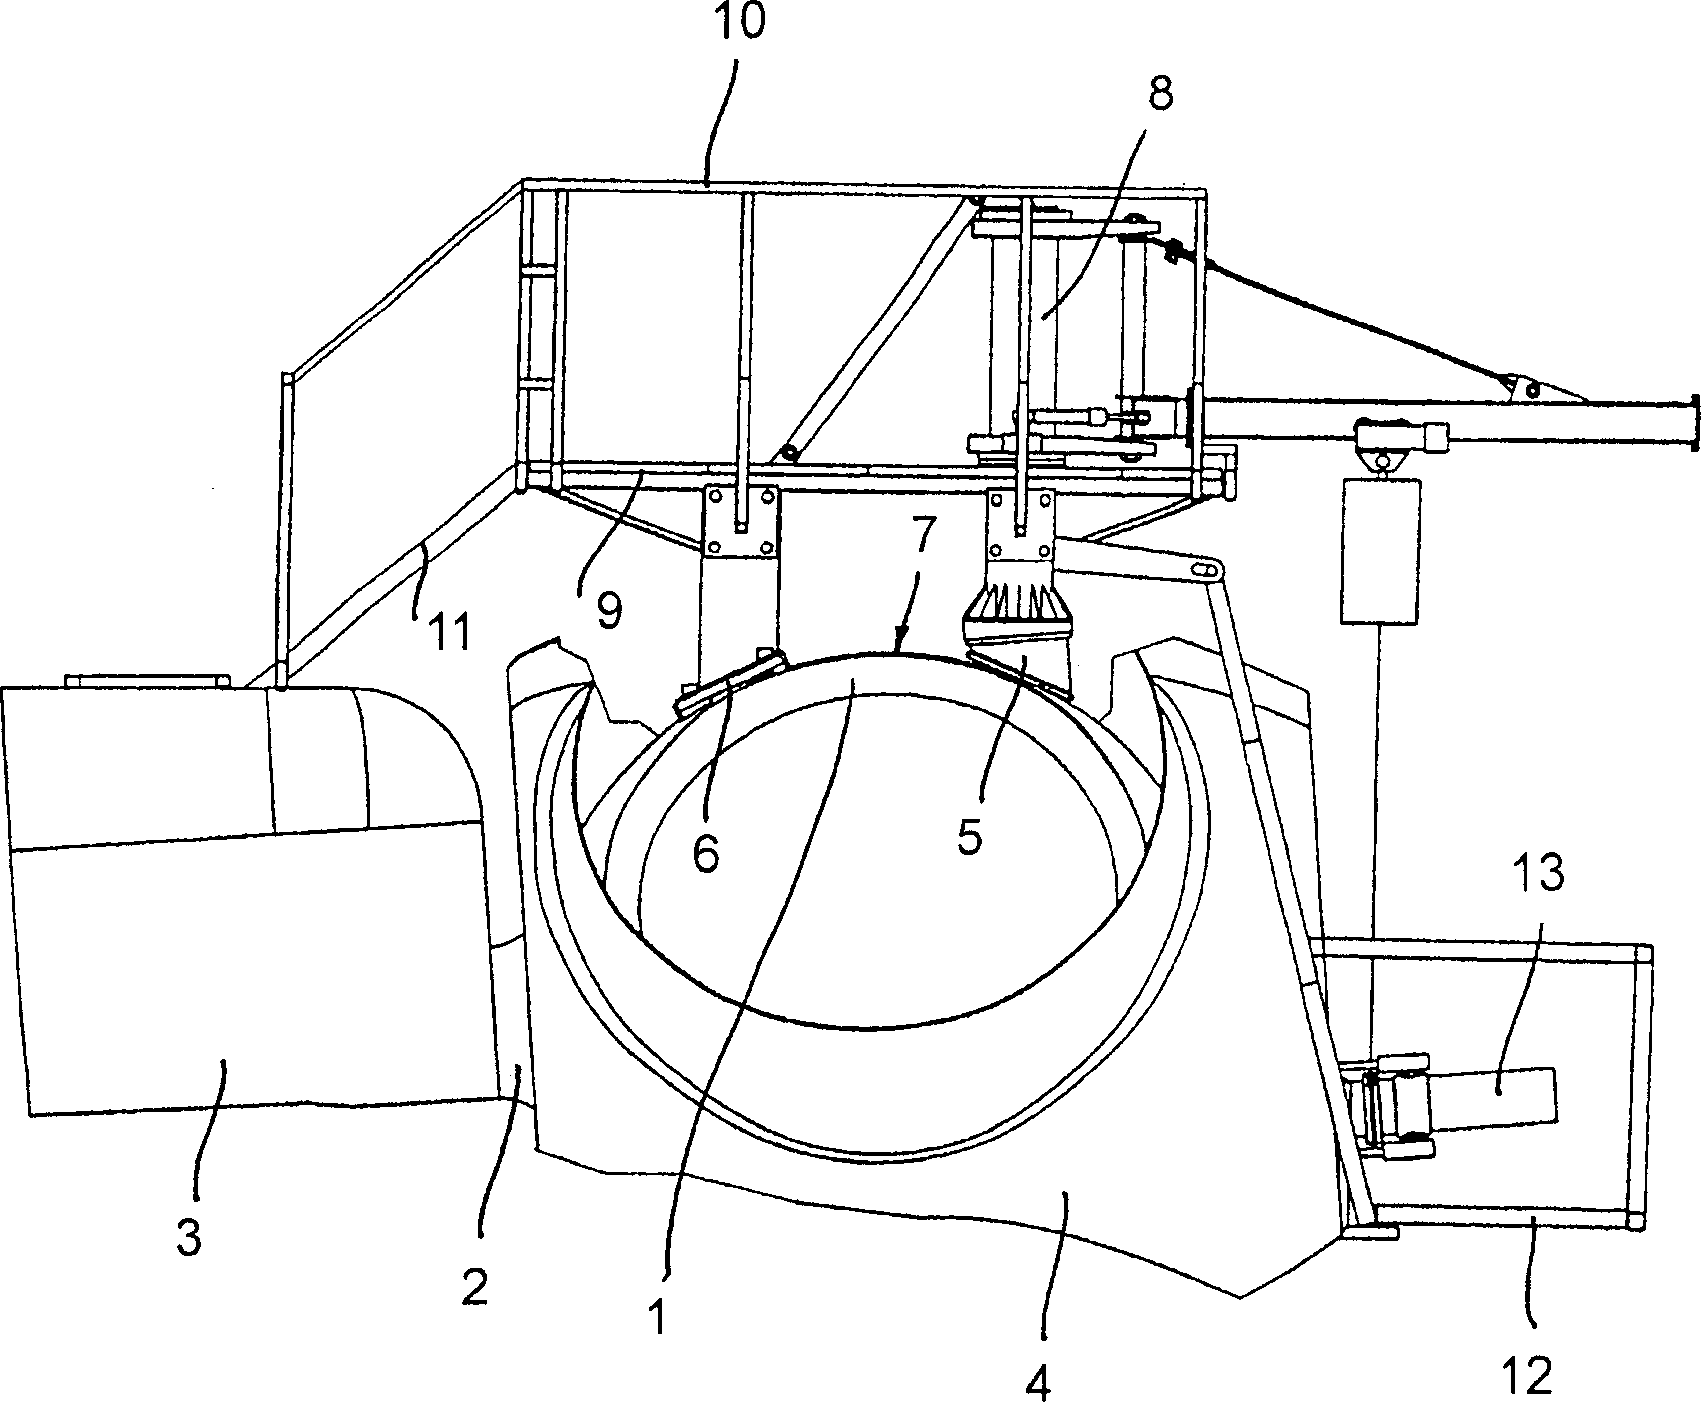 Method of conducting service on a wind turbine using equipment mounted on the hub